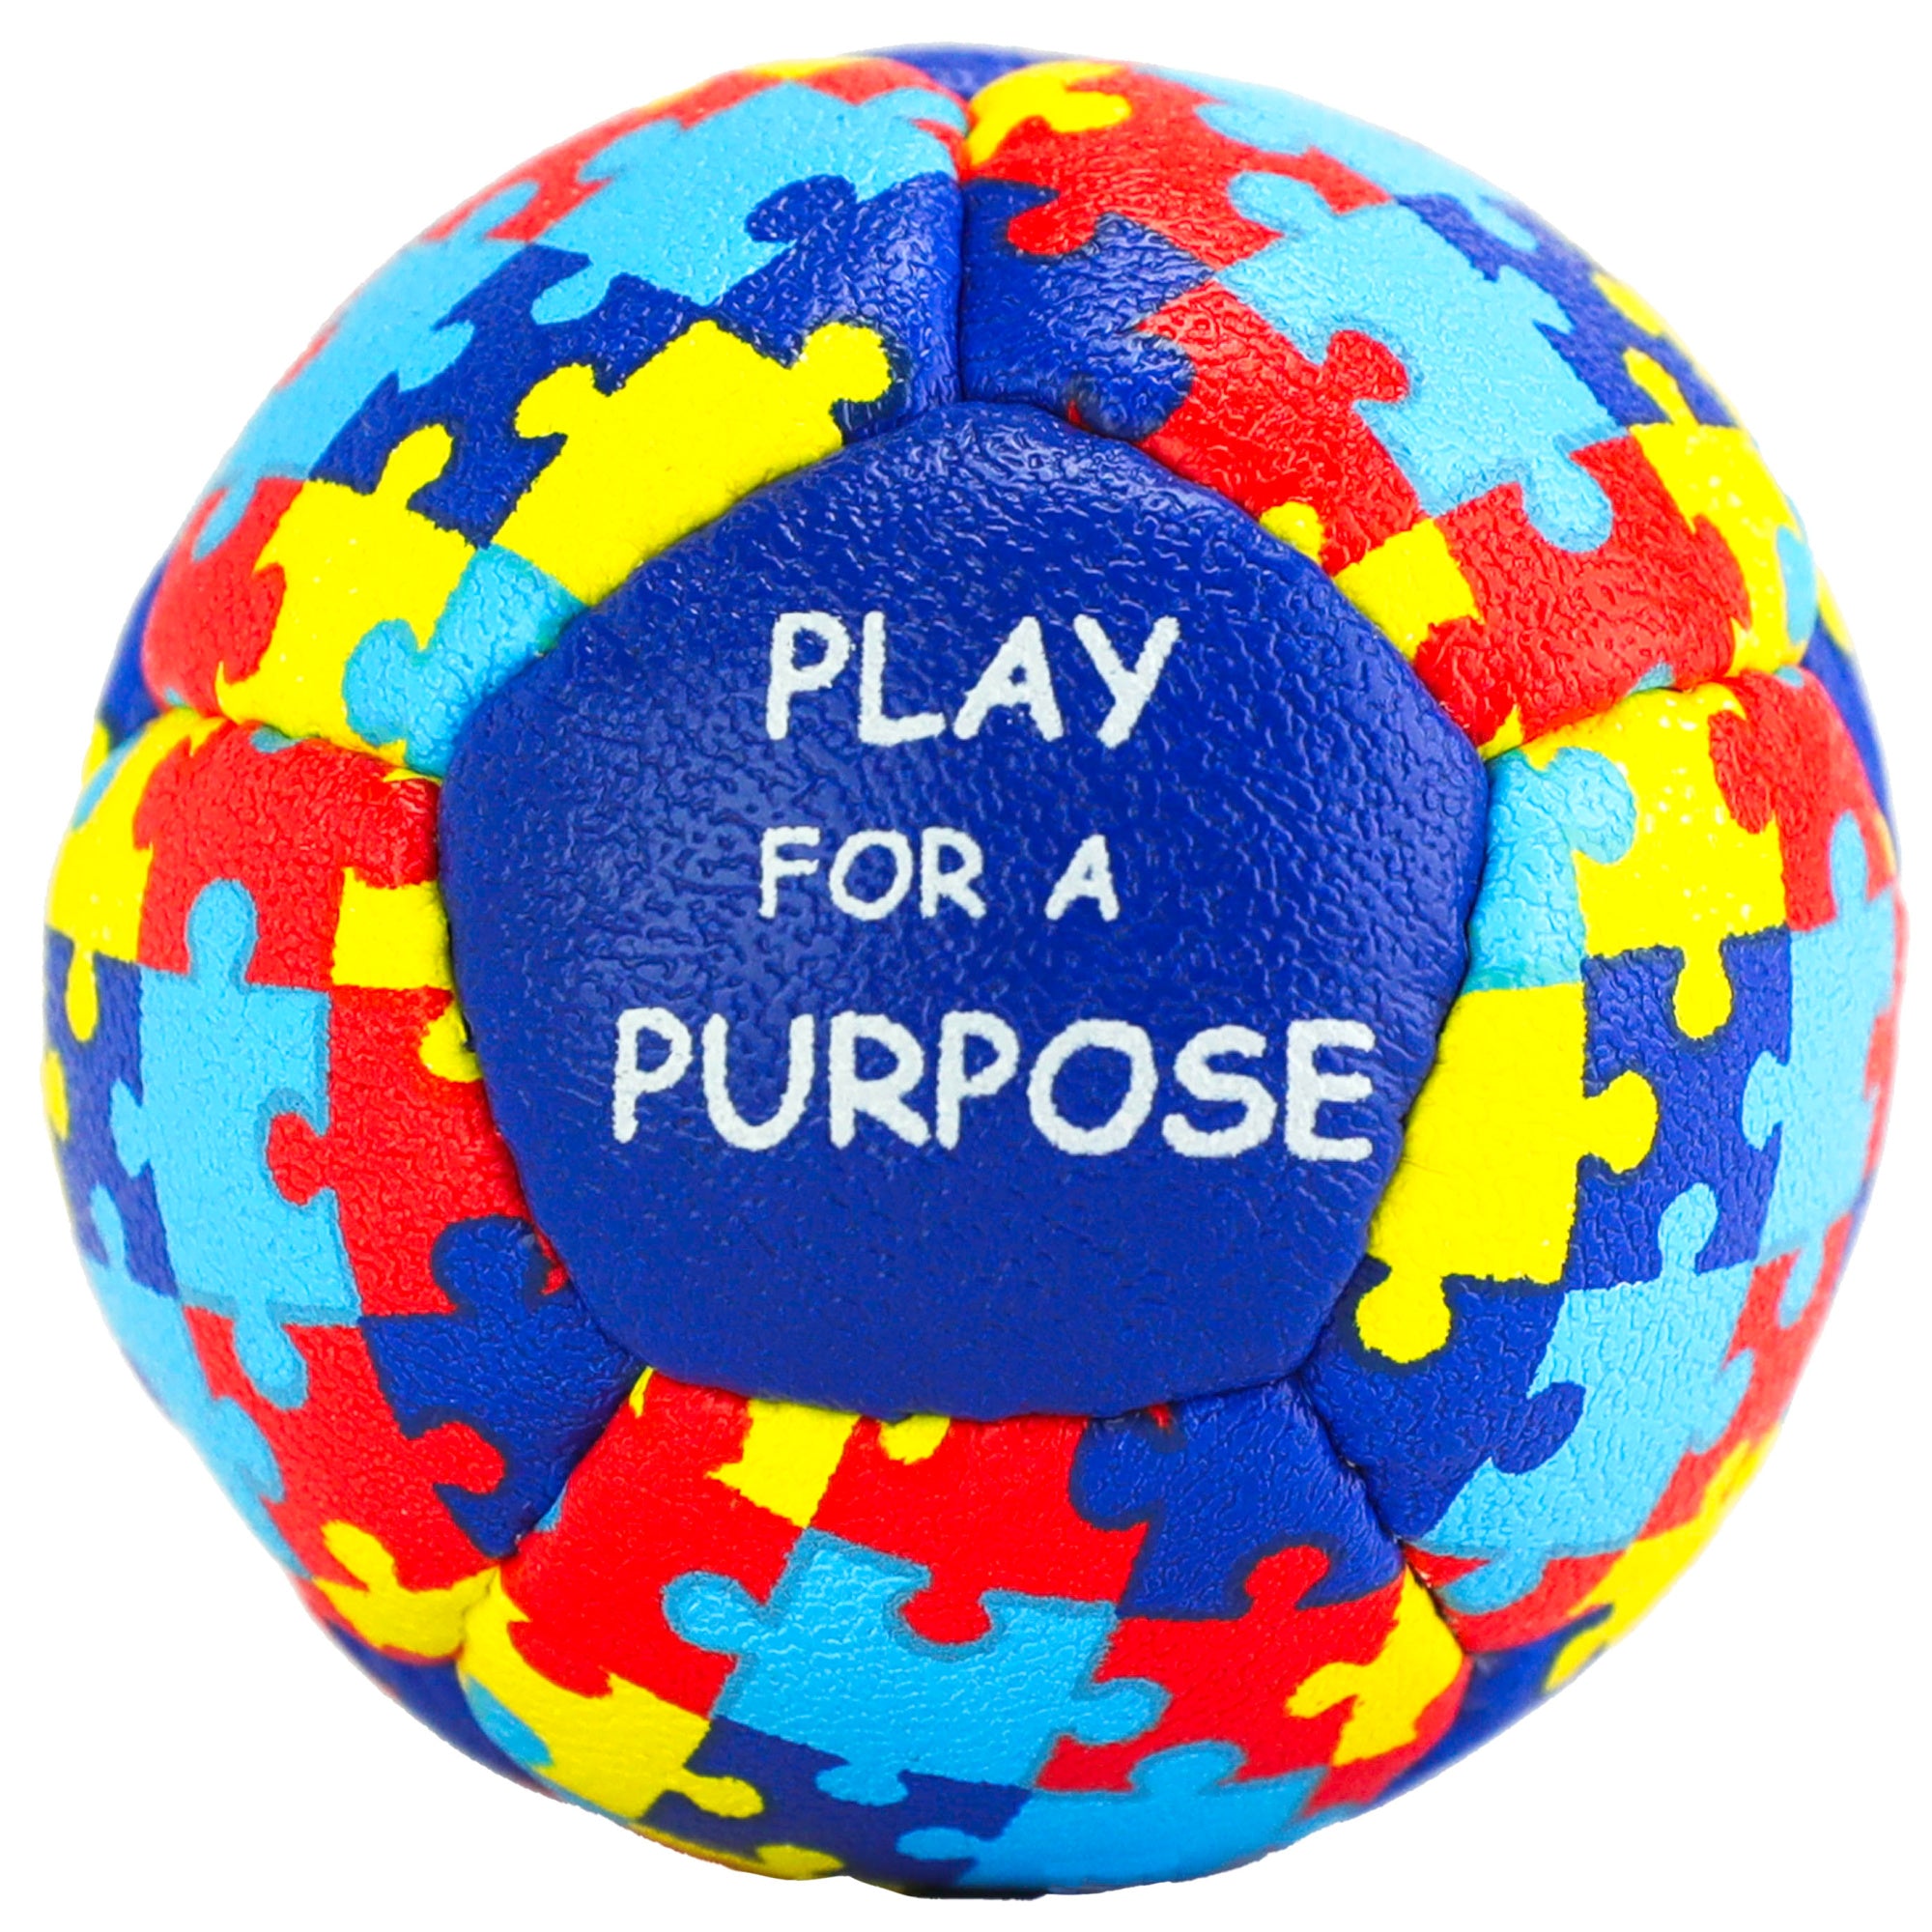 Swax Lax Lacrosse Practice Ball - Autism - Play For a Purpose - Play for a Purpose